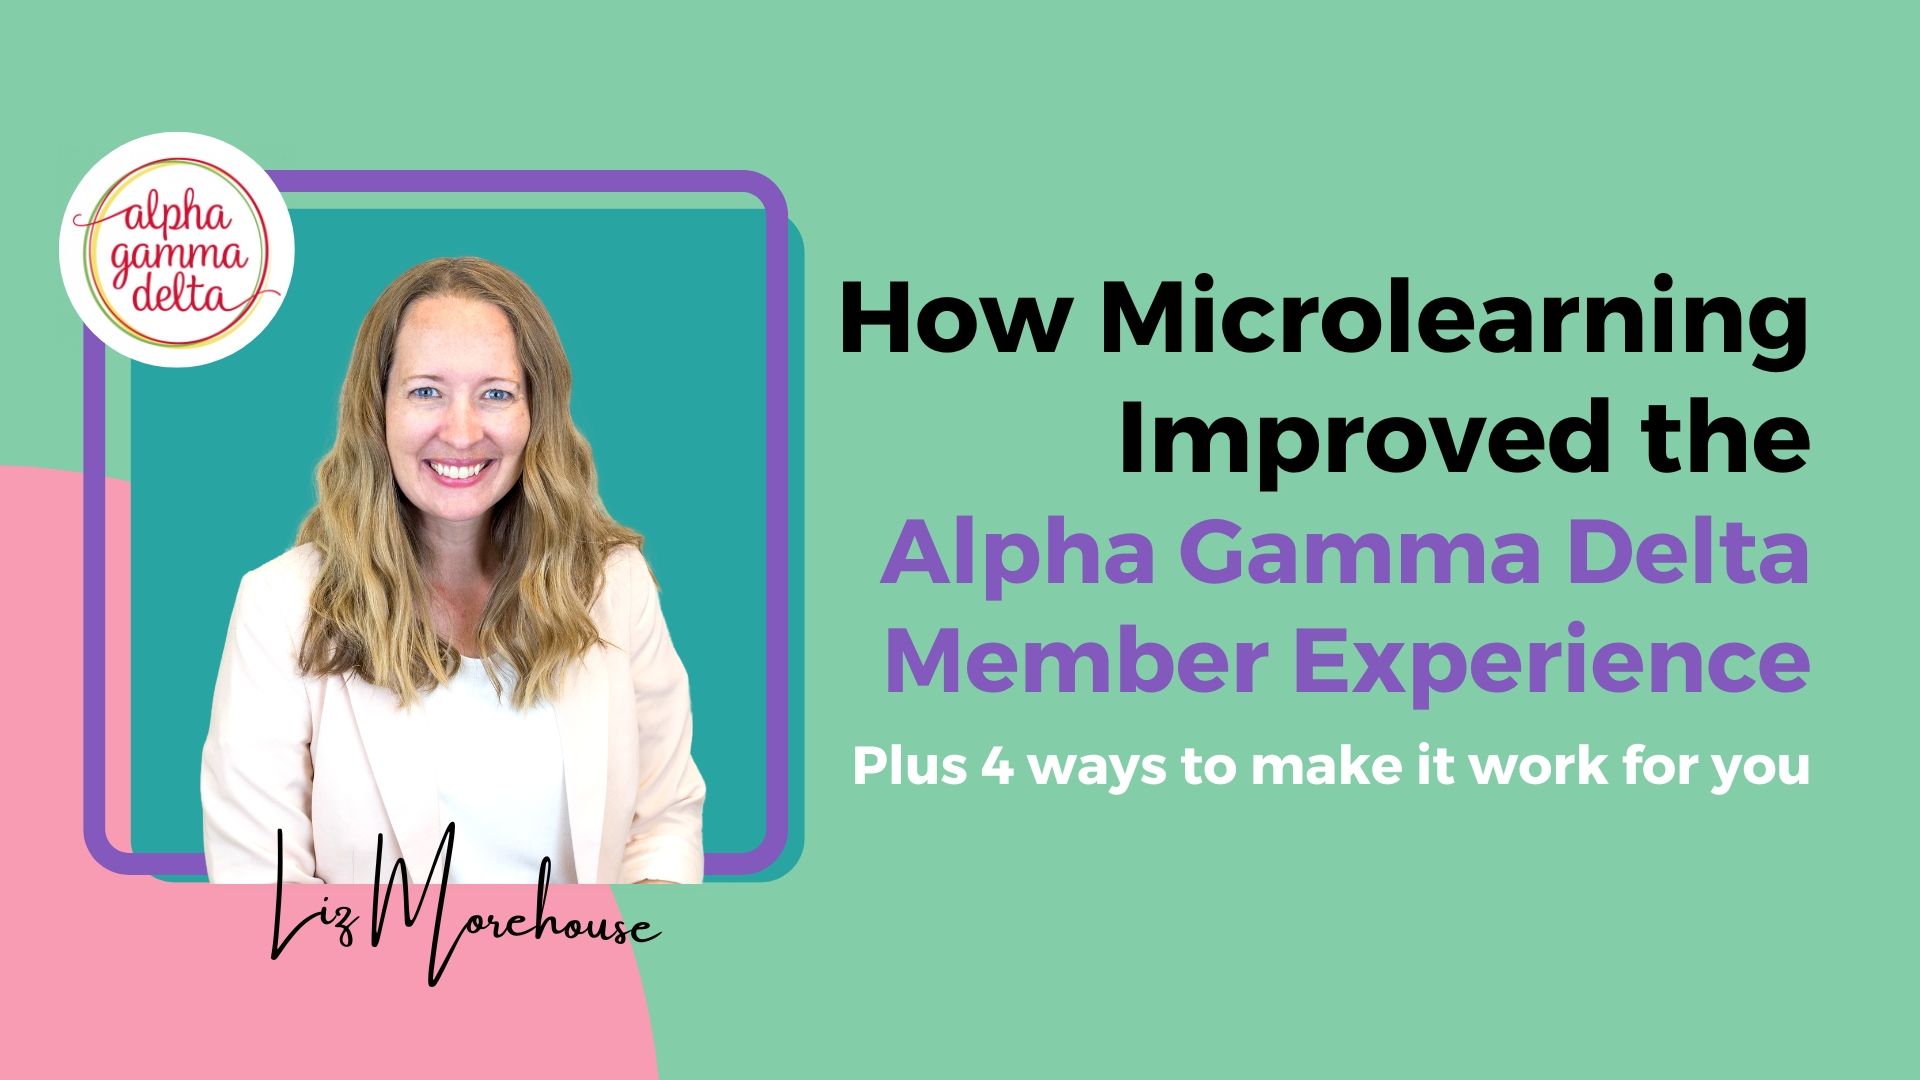 How Microlearning Improved the Alpha Gamma Delta Member Experience—Plus 4 Ways to Make It Work for You